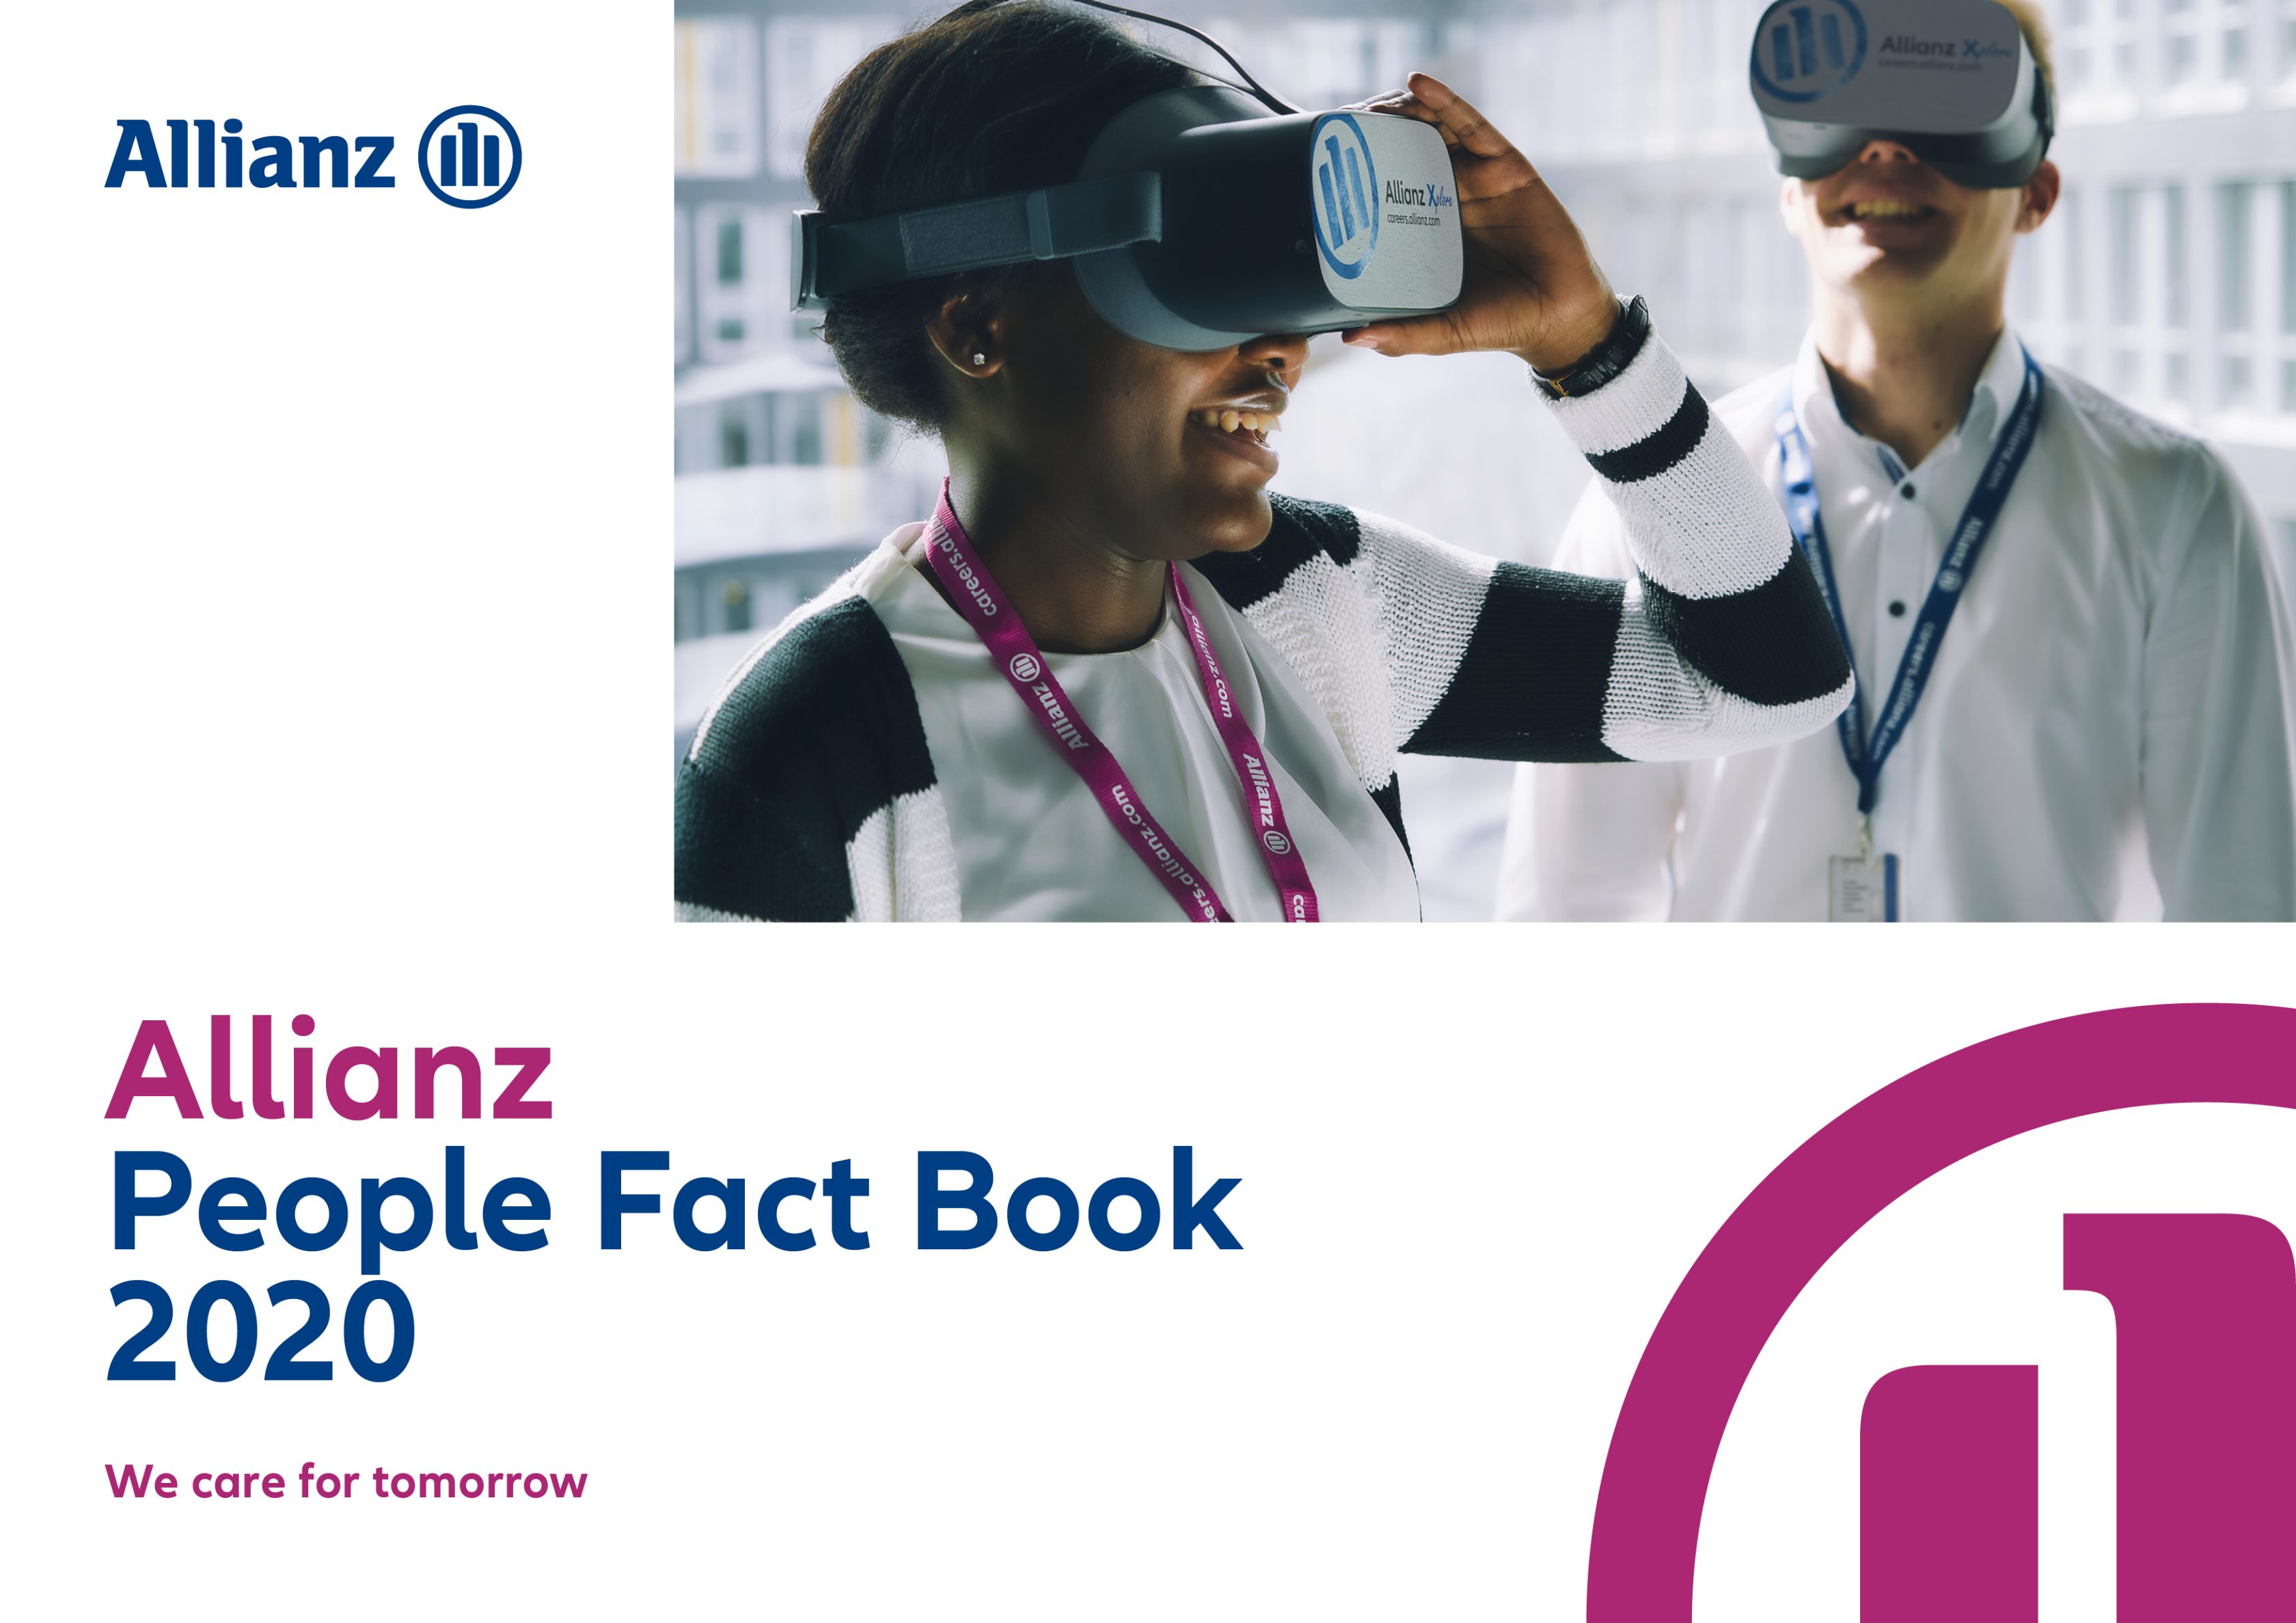 Allianz People Fact Book 2020 - Cover